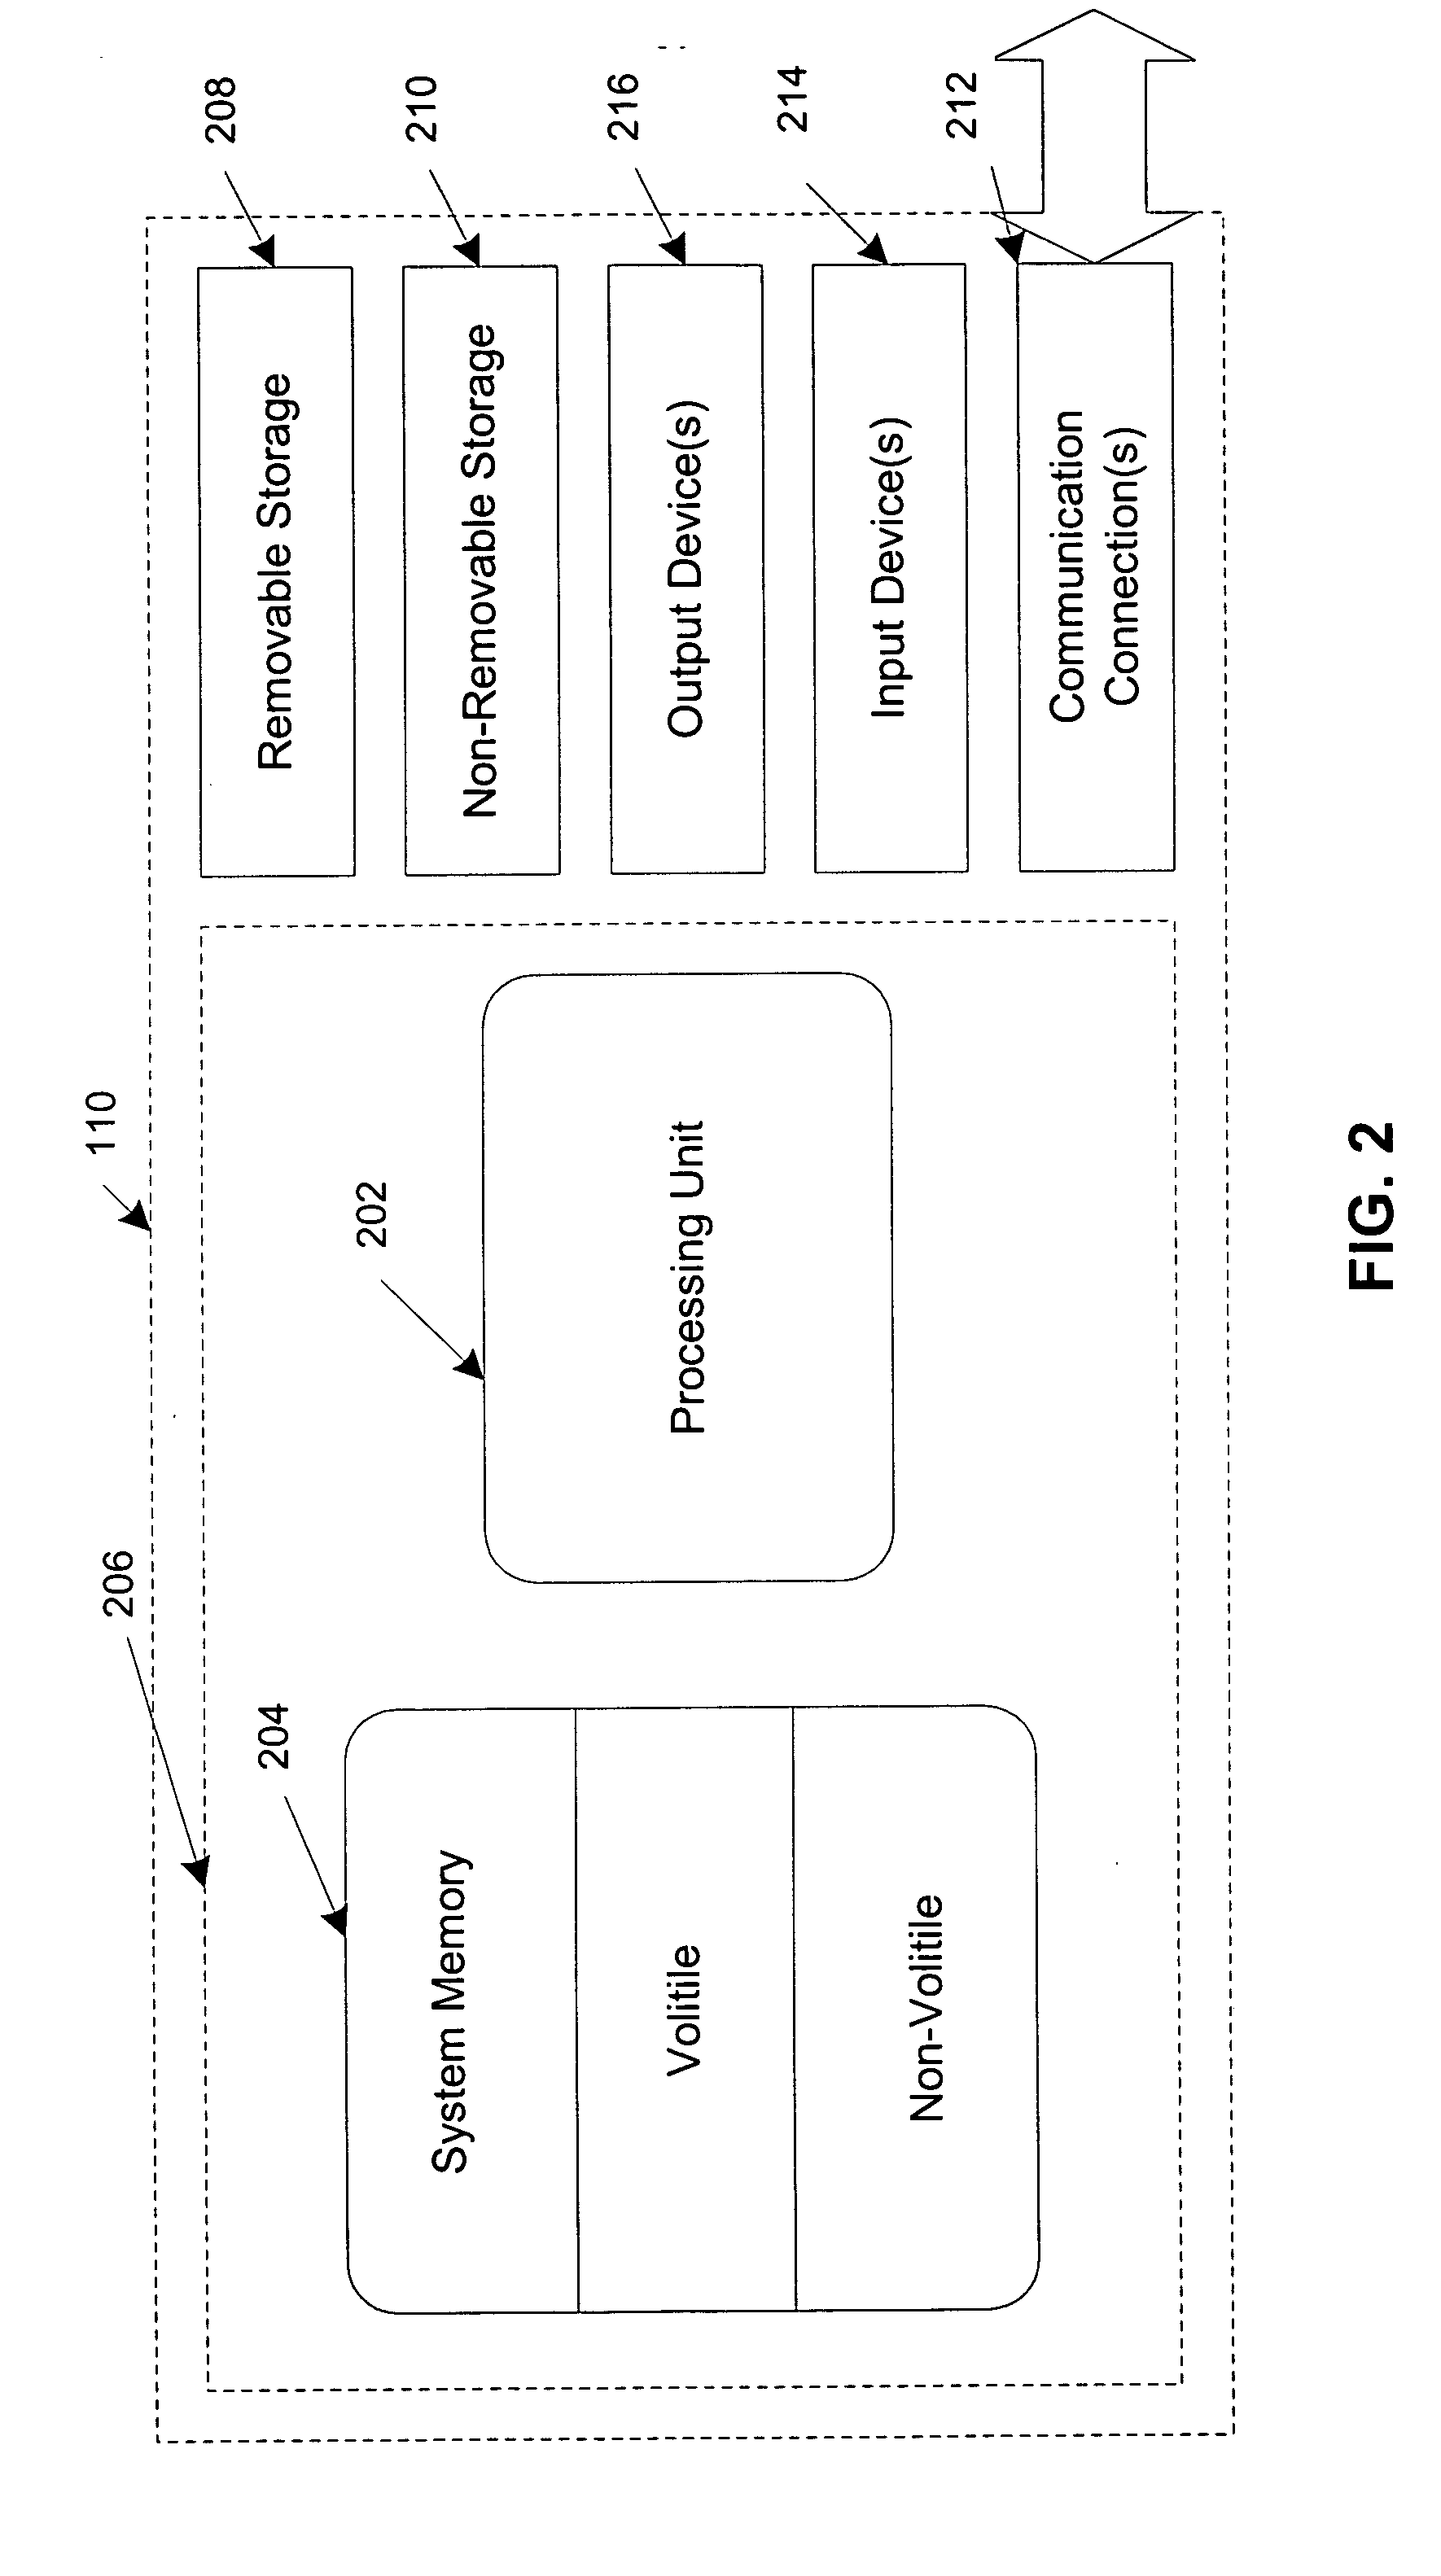 Method and system for distributing and installing software